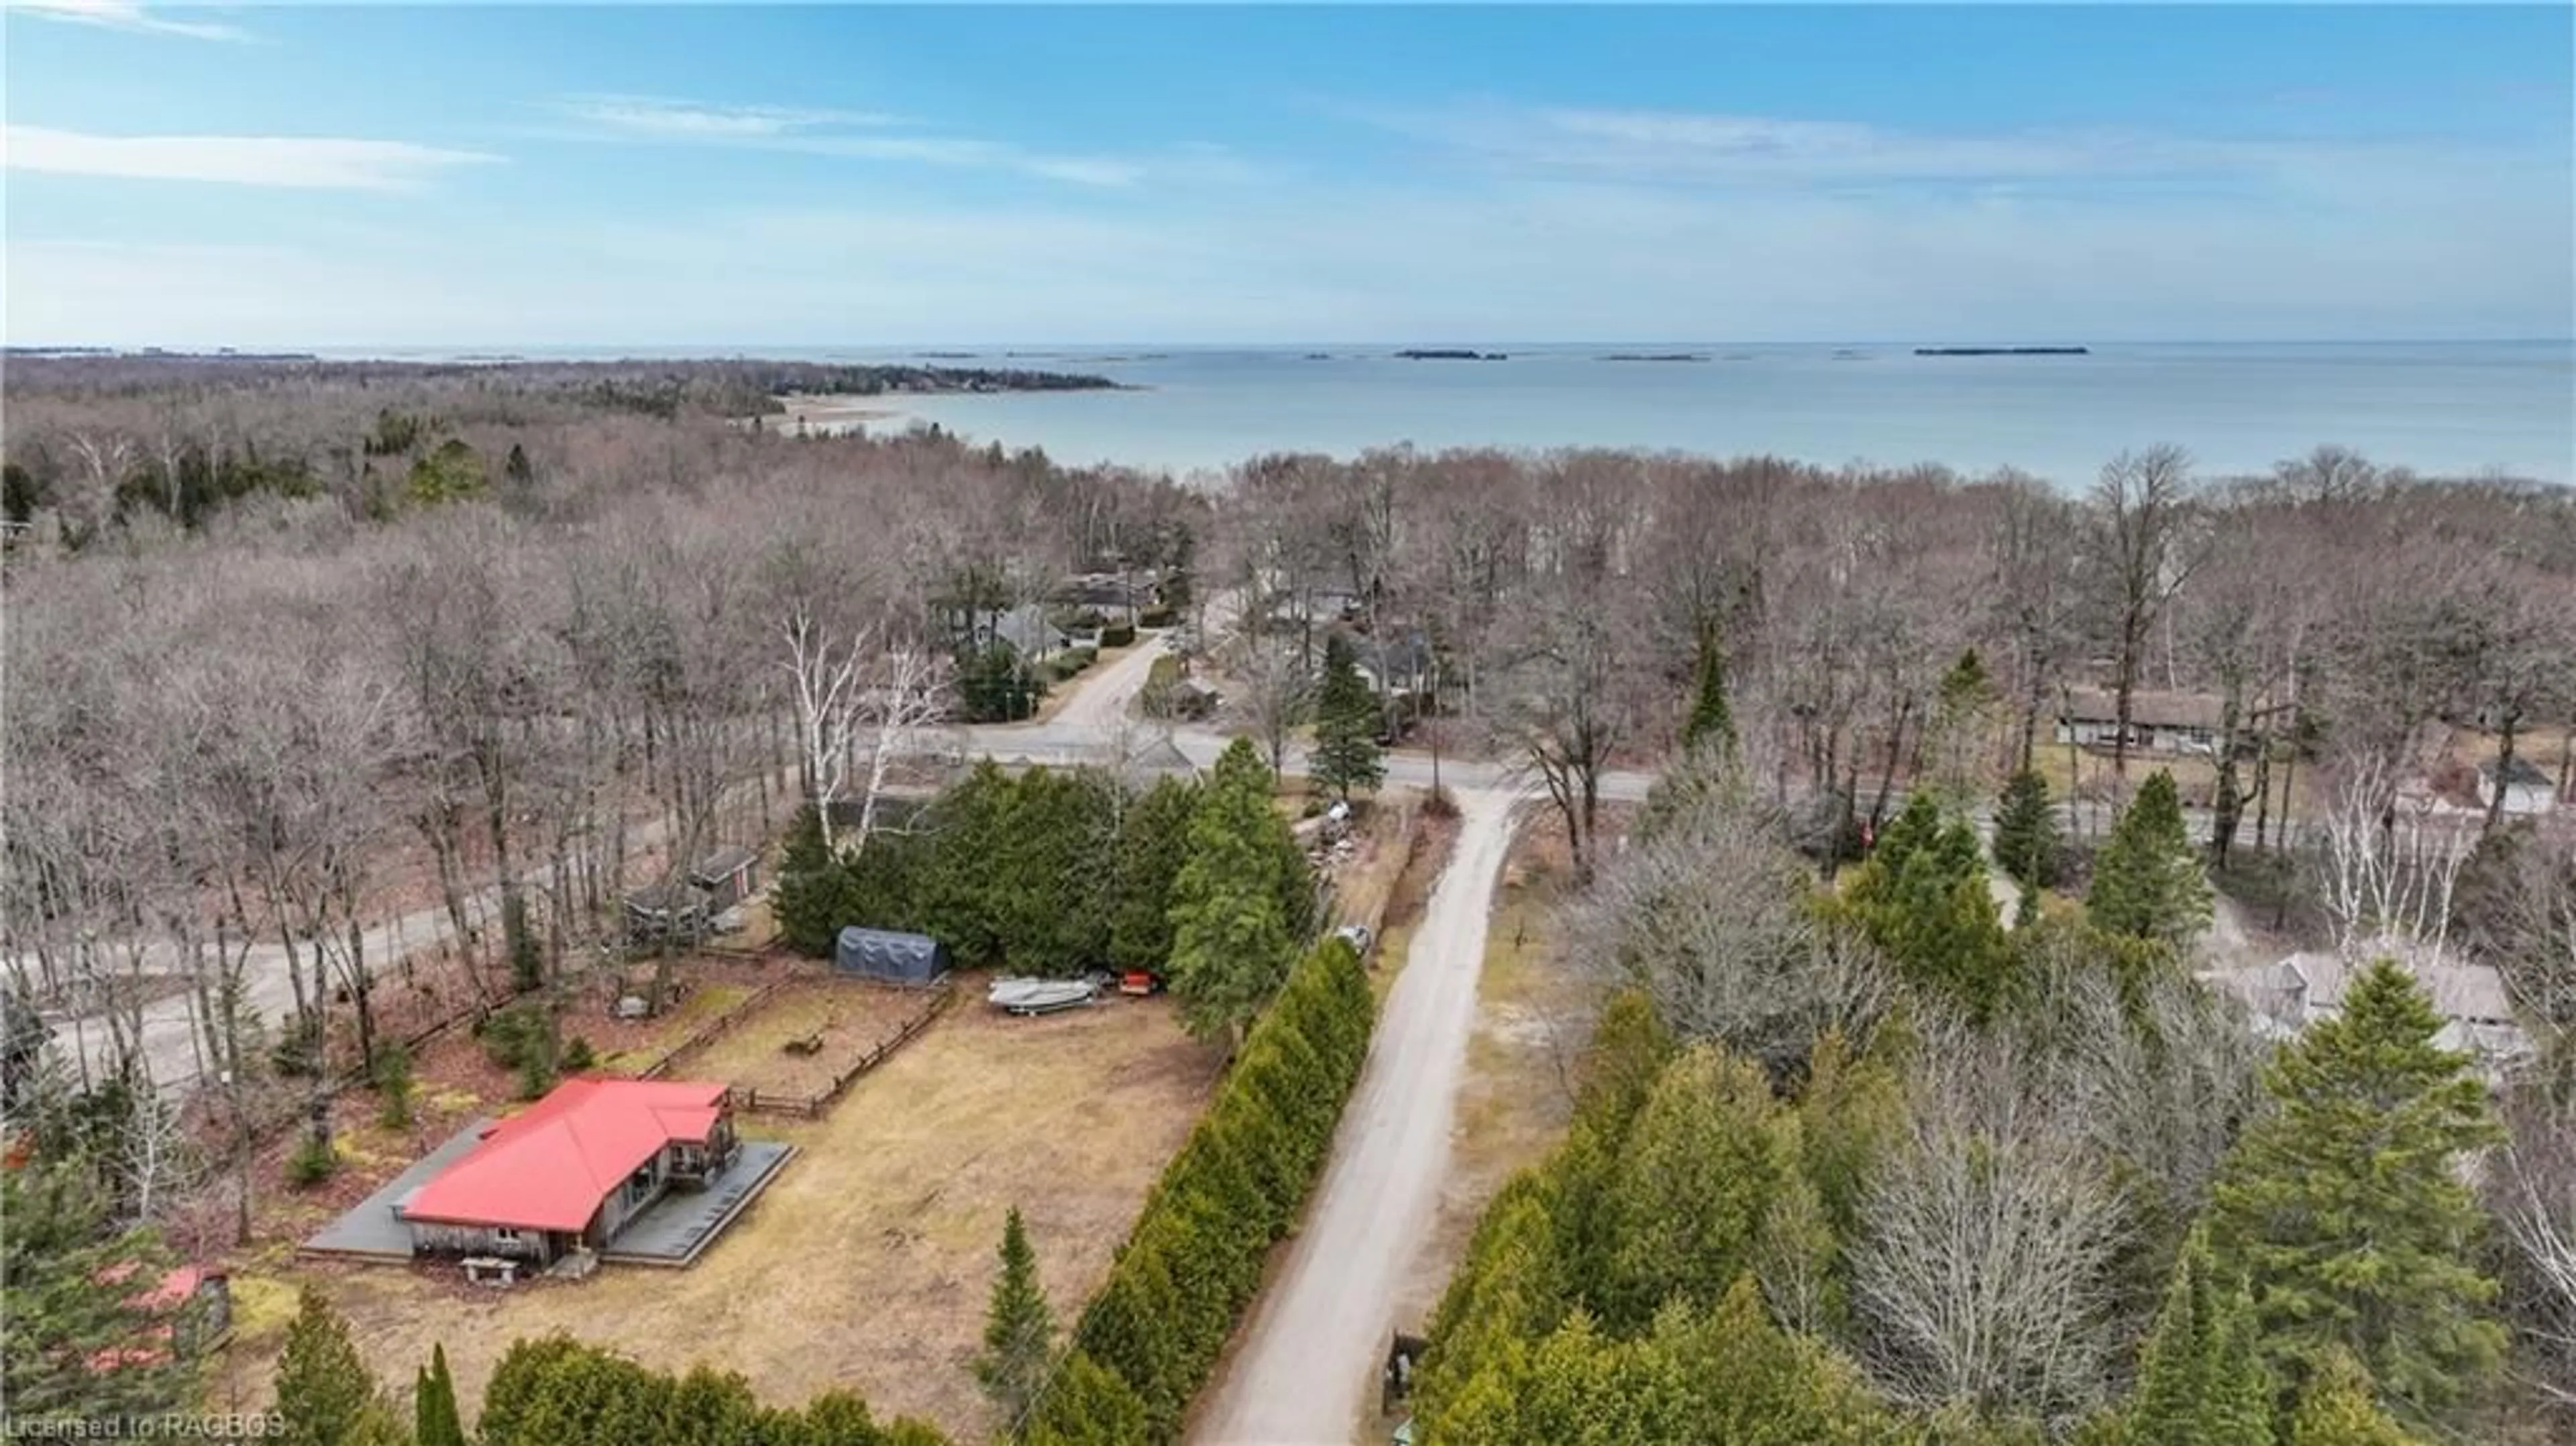 Lakeview for 426 Huron Rd, Red Bay Ontario N0H 2T0